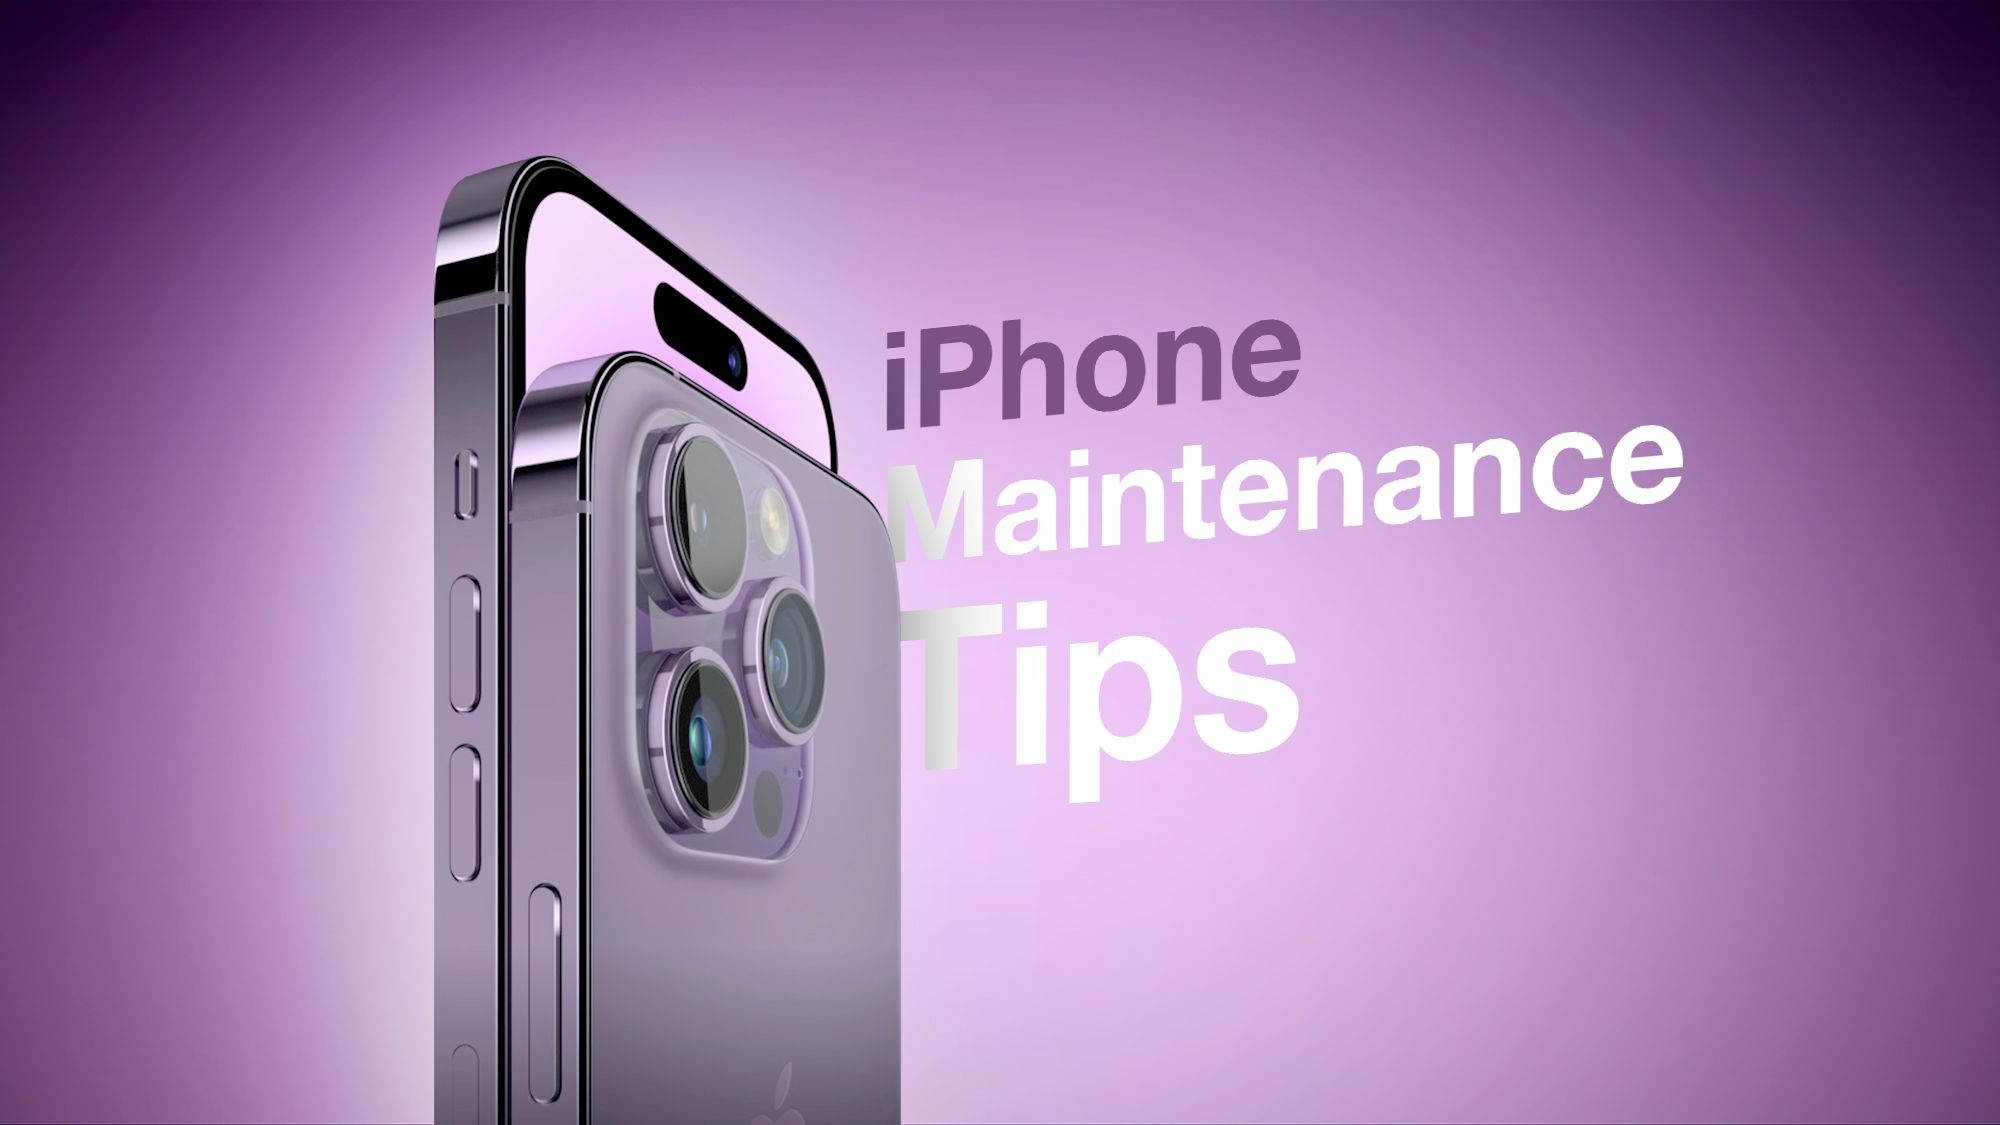 Get Ready for the New Year With These iPhone Maintenance Tips